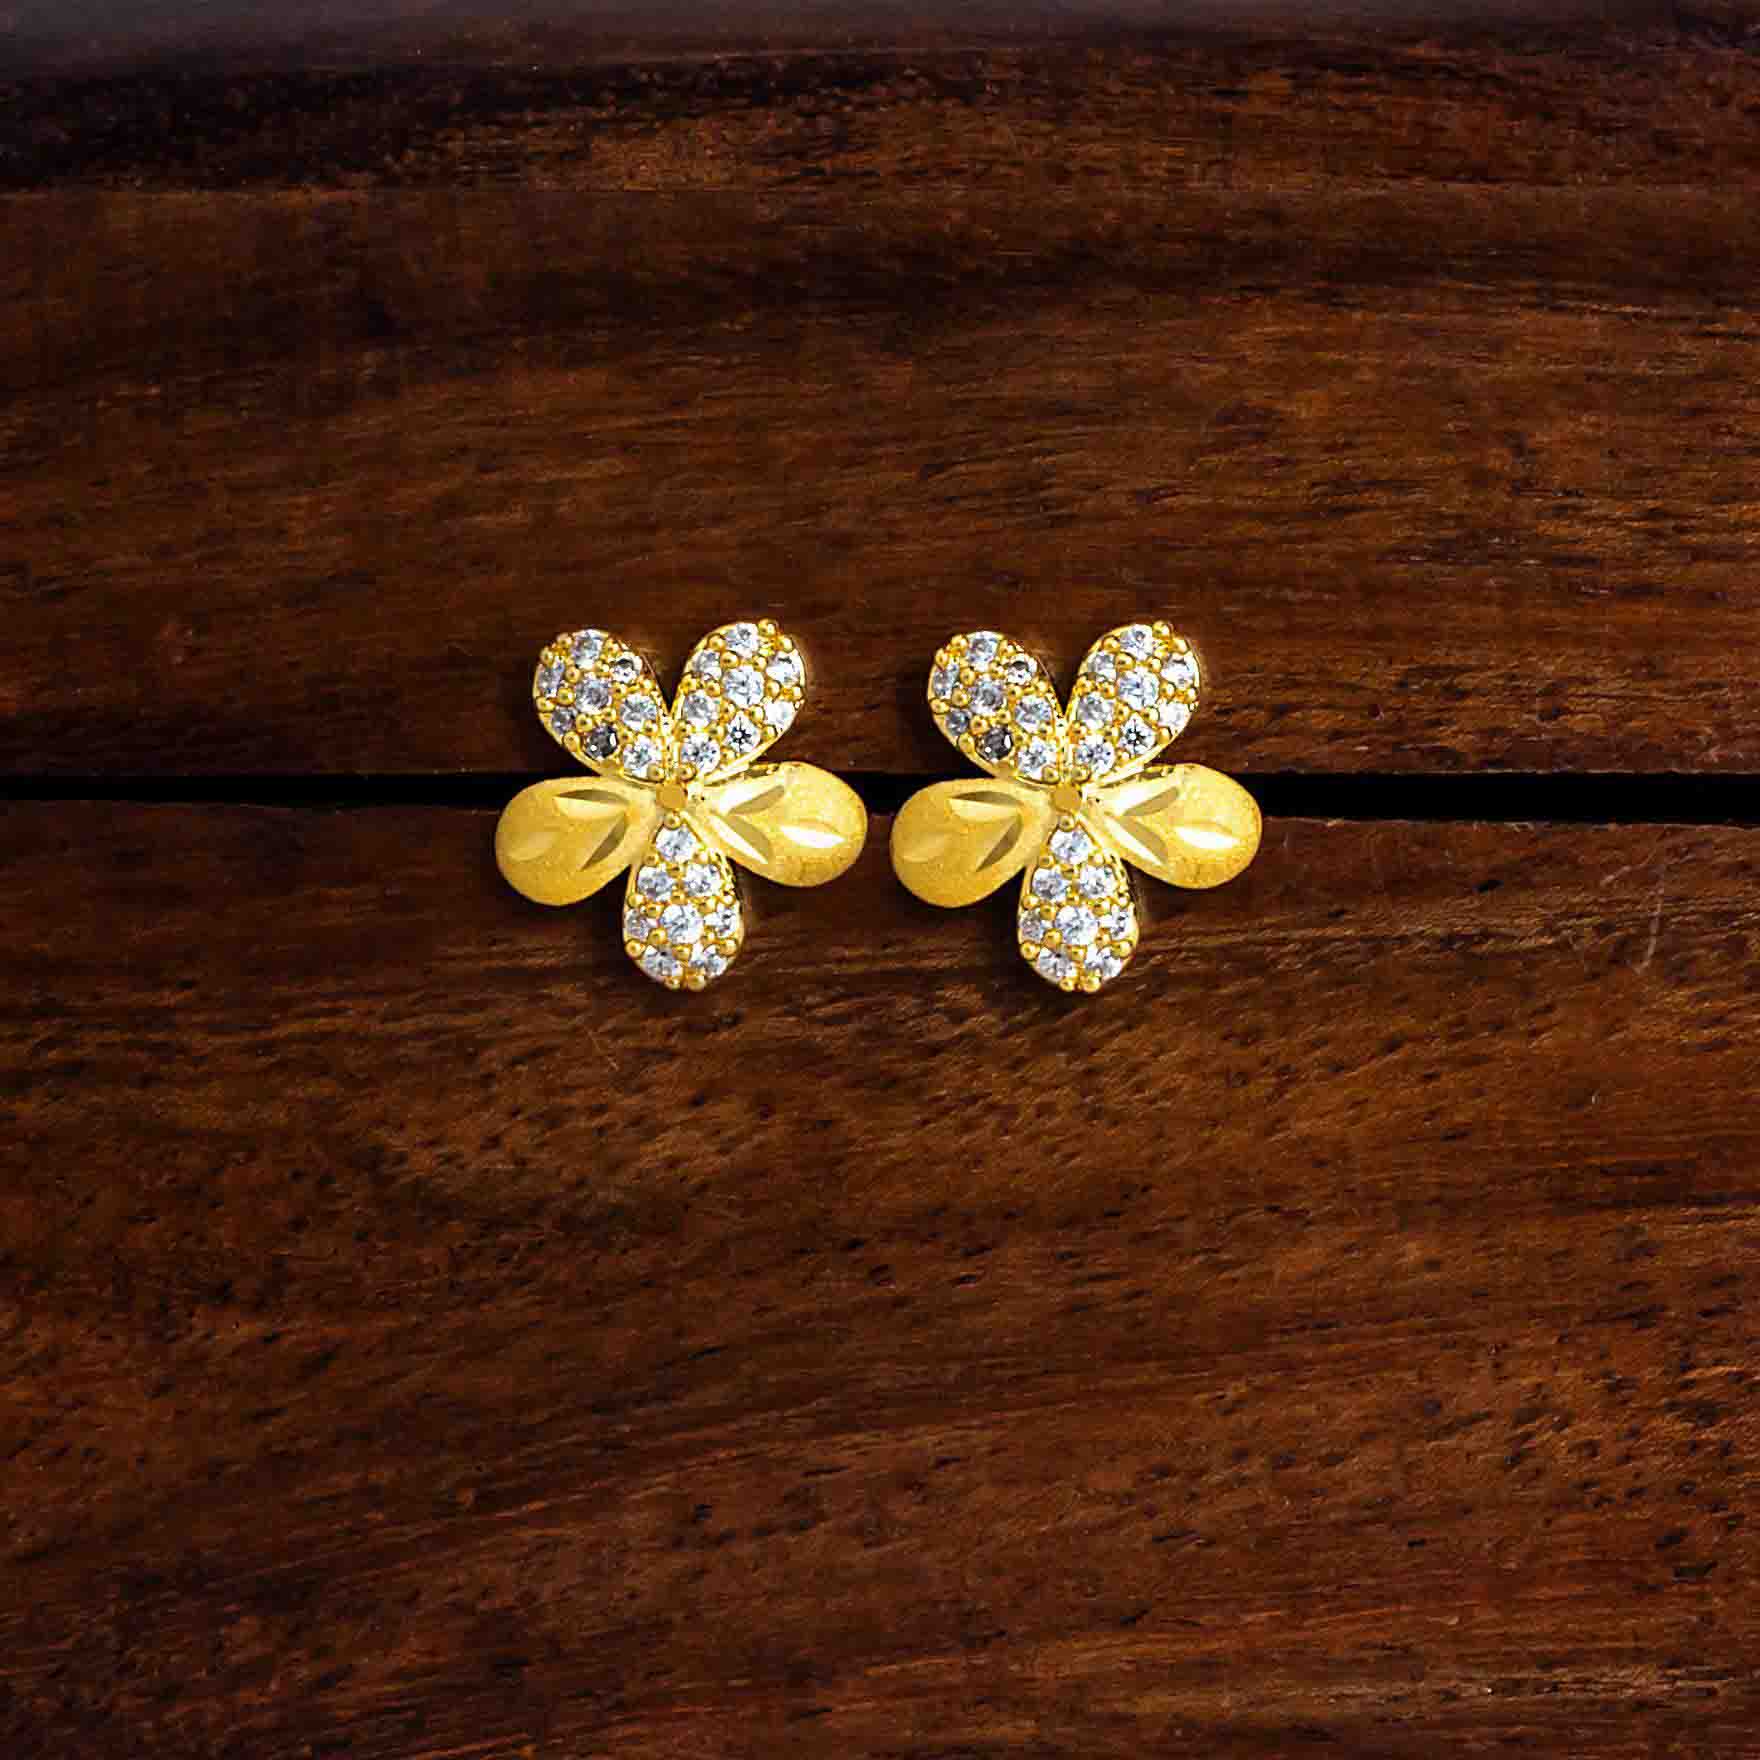 Pure Gold Layered Flower Studs Earrings at Best Price